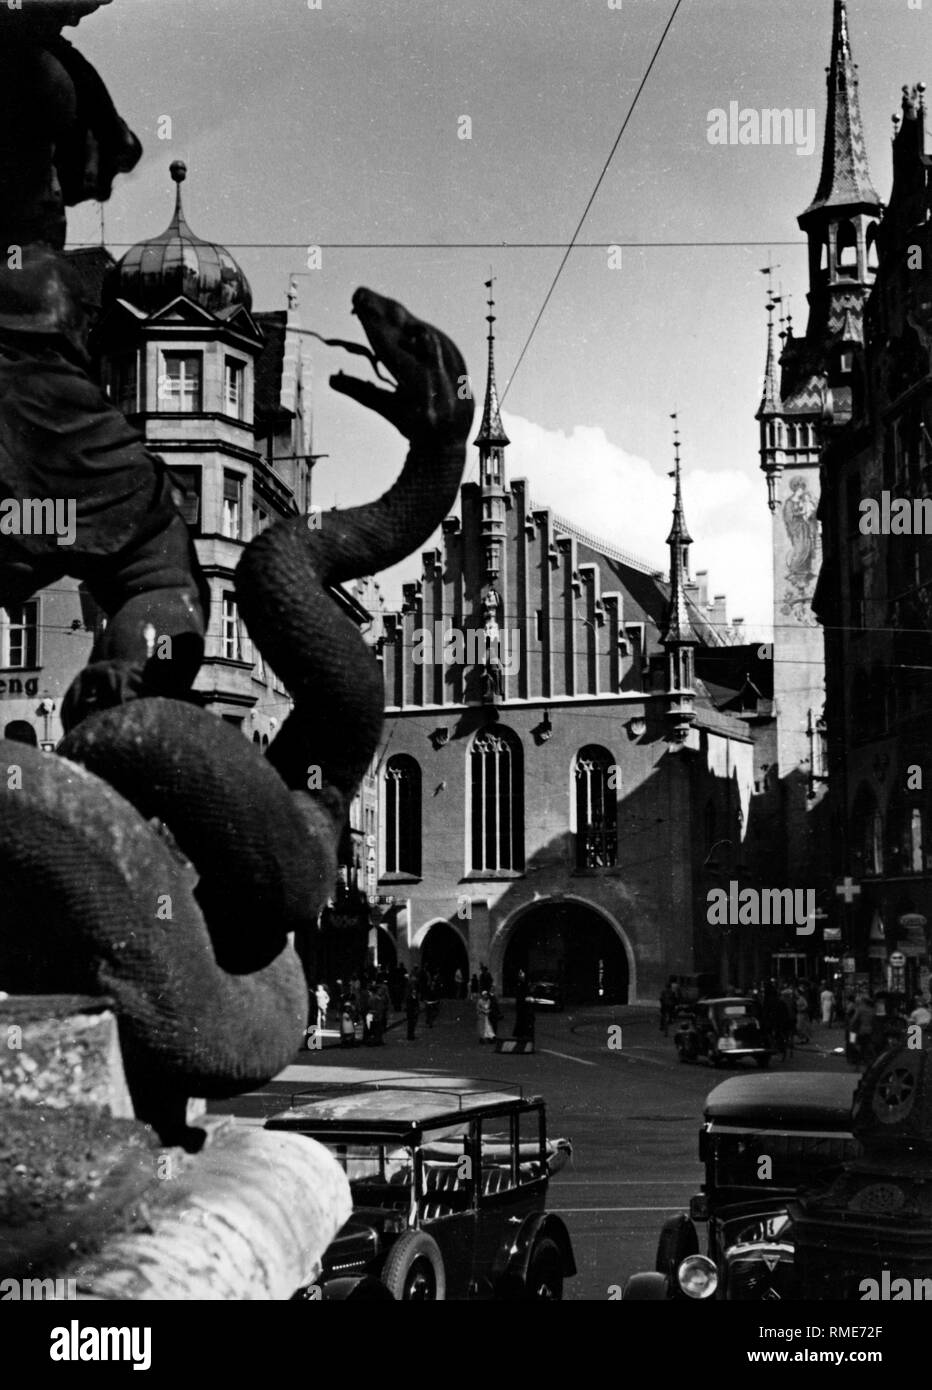 A part of the Mariensaeule (Marian Column), showing a snake, and the Alte Rathaus (Old Town Hall) in Munich. Stock Photo